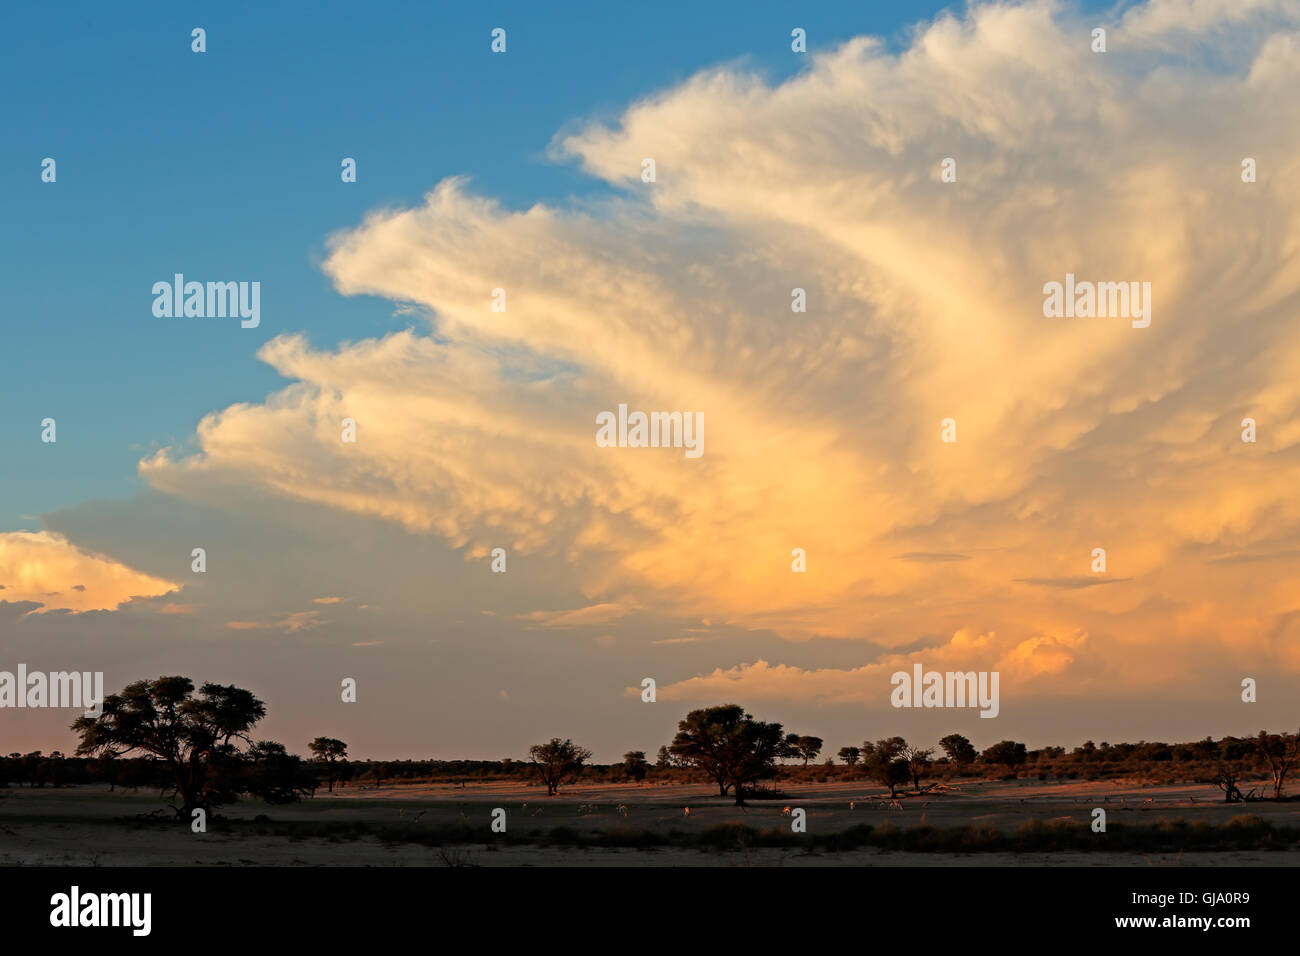 Dramatic late afternoon cloudscape over the Kalahari desert, South Africa Stock Photo